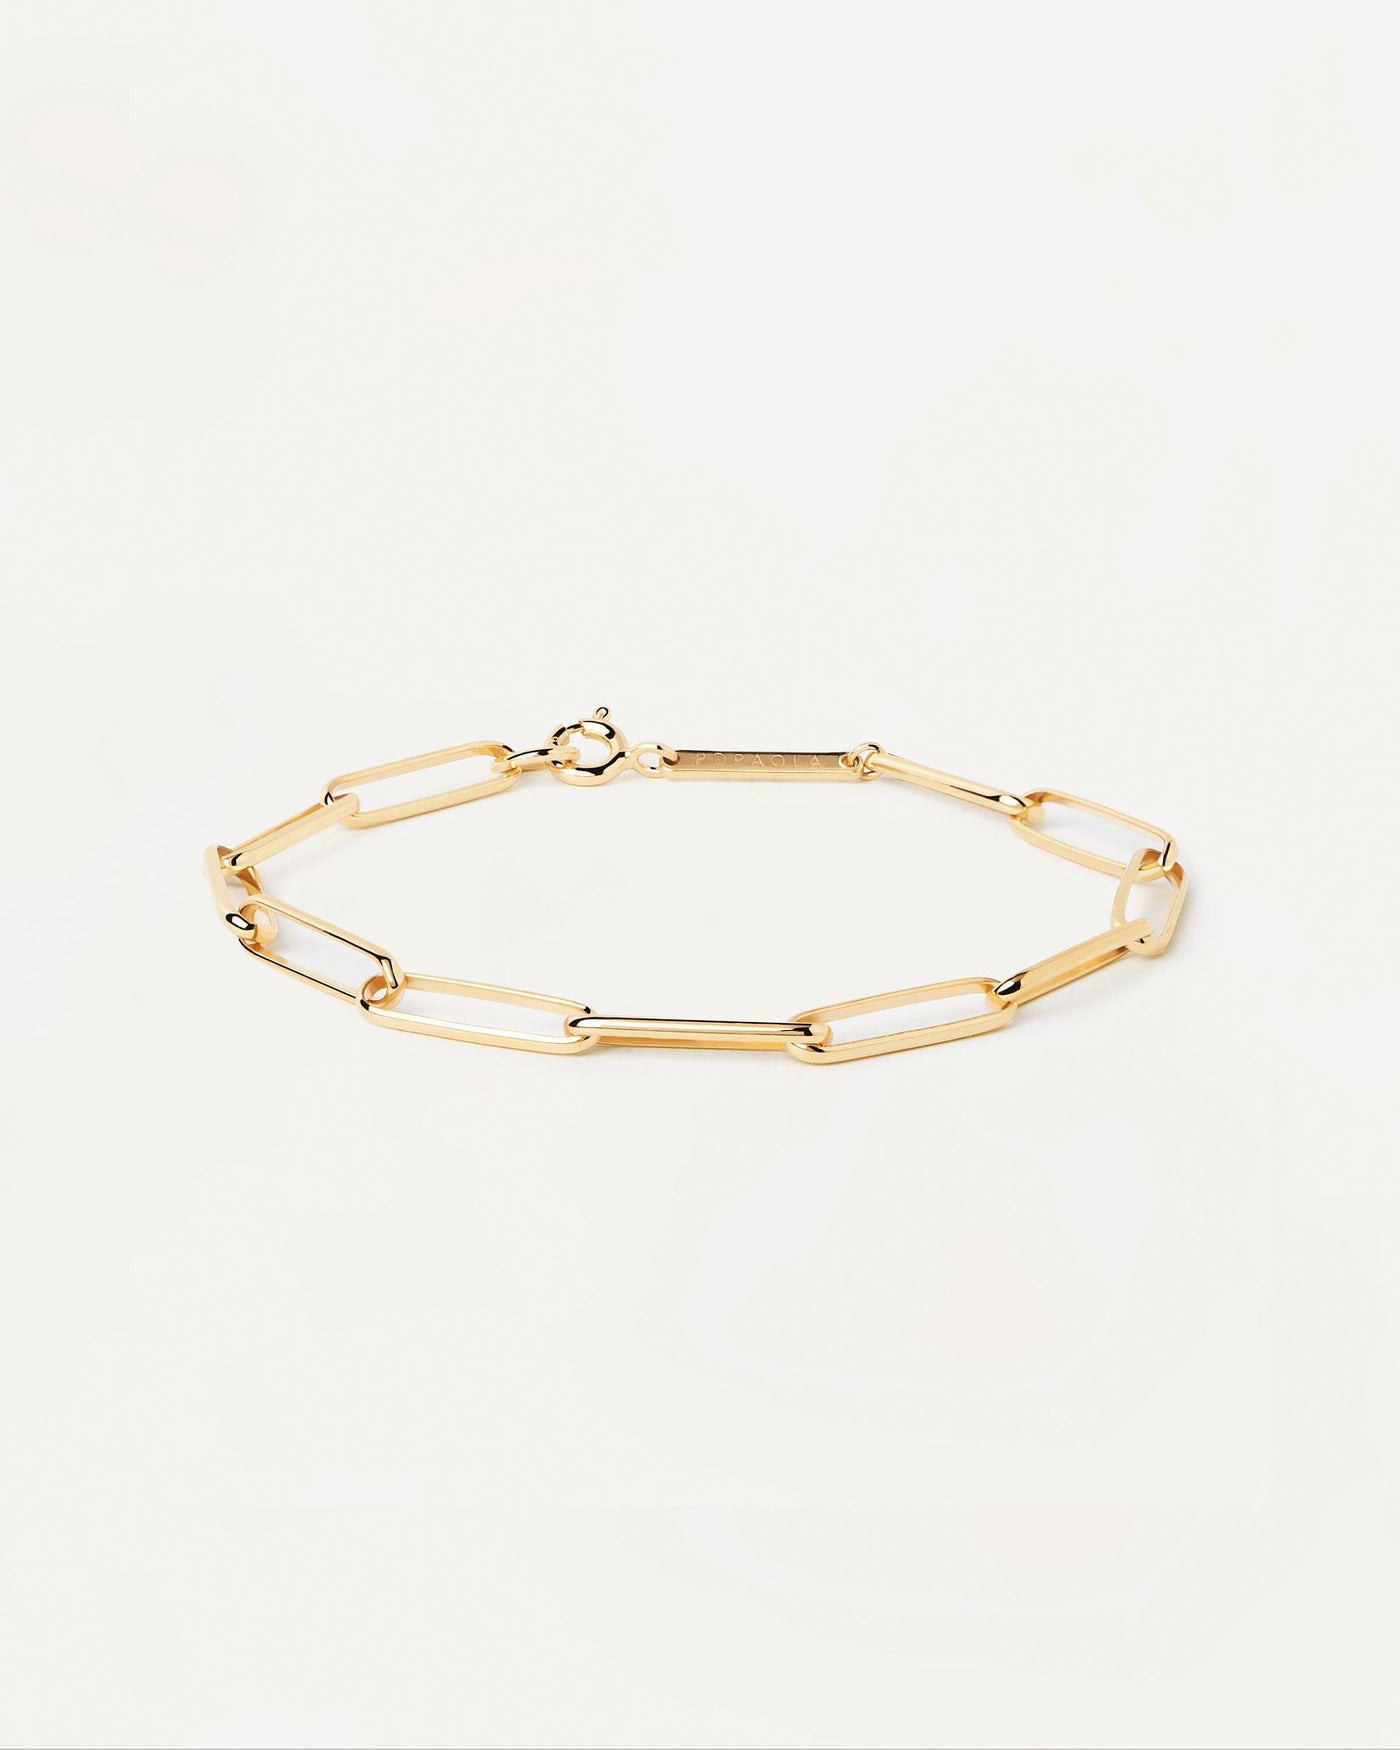 2024 Selection | Big Statement Chain Bracelet. Statement chain bracelet in gold-plated silver with large links. Get the latest arrival from PDPAOLA. Place your order safely and get this Best Seller. Free Shipping.